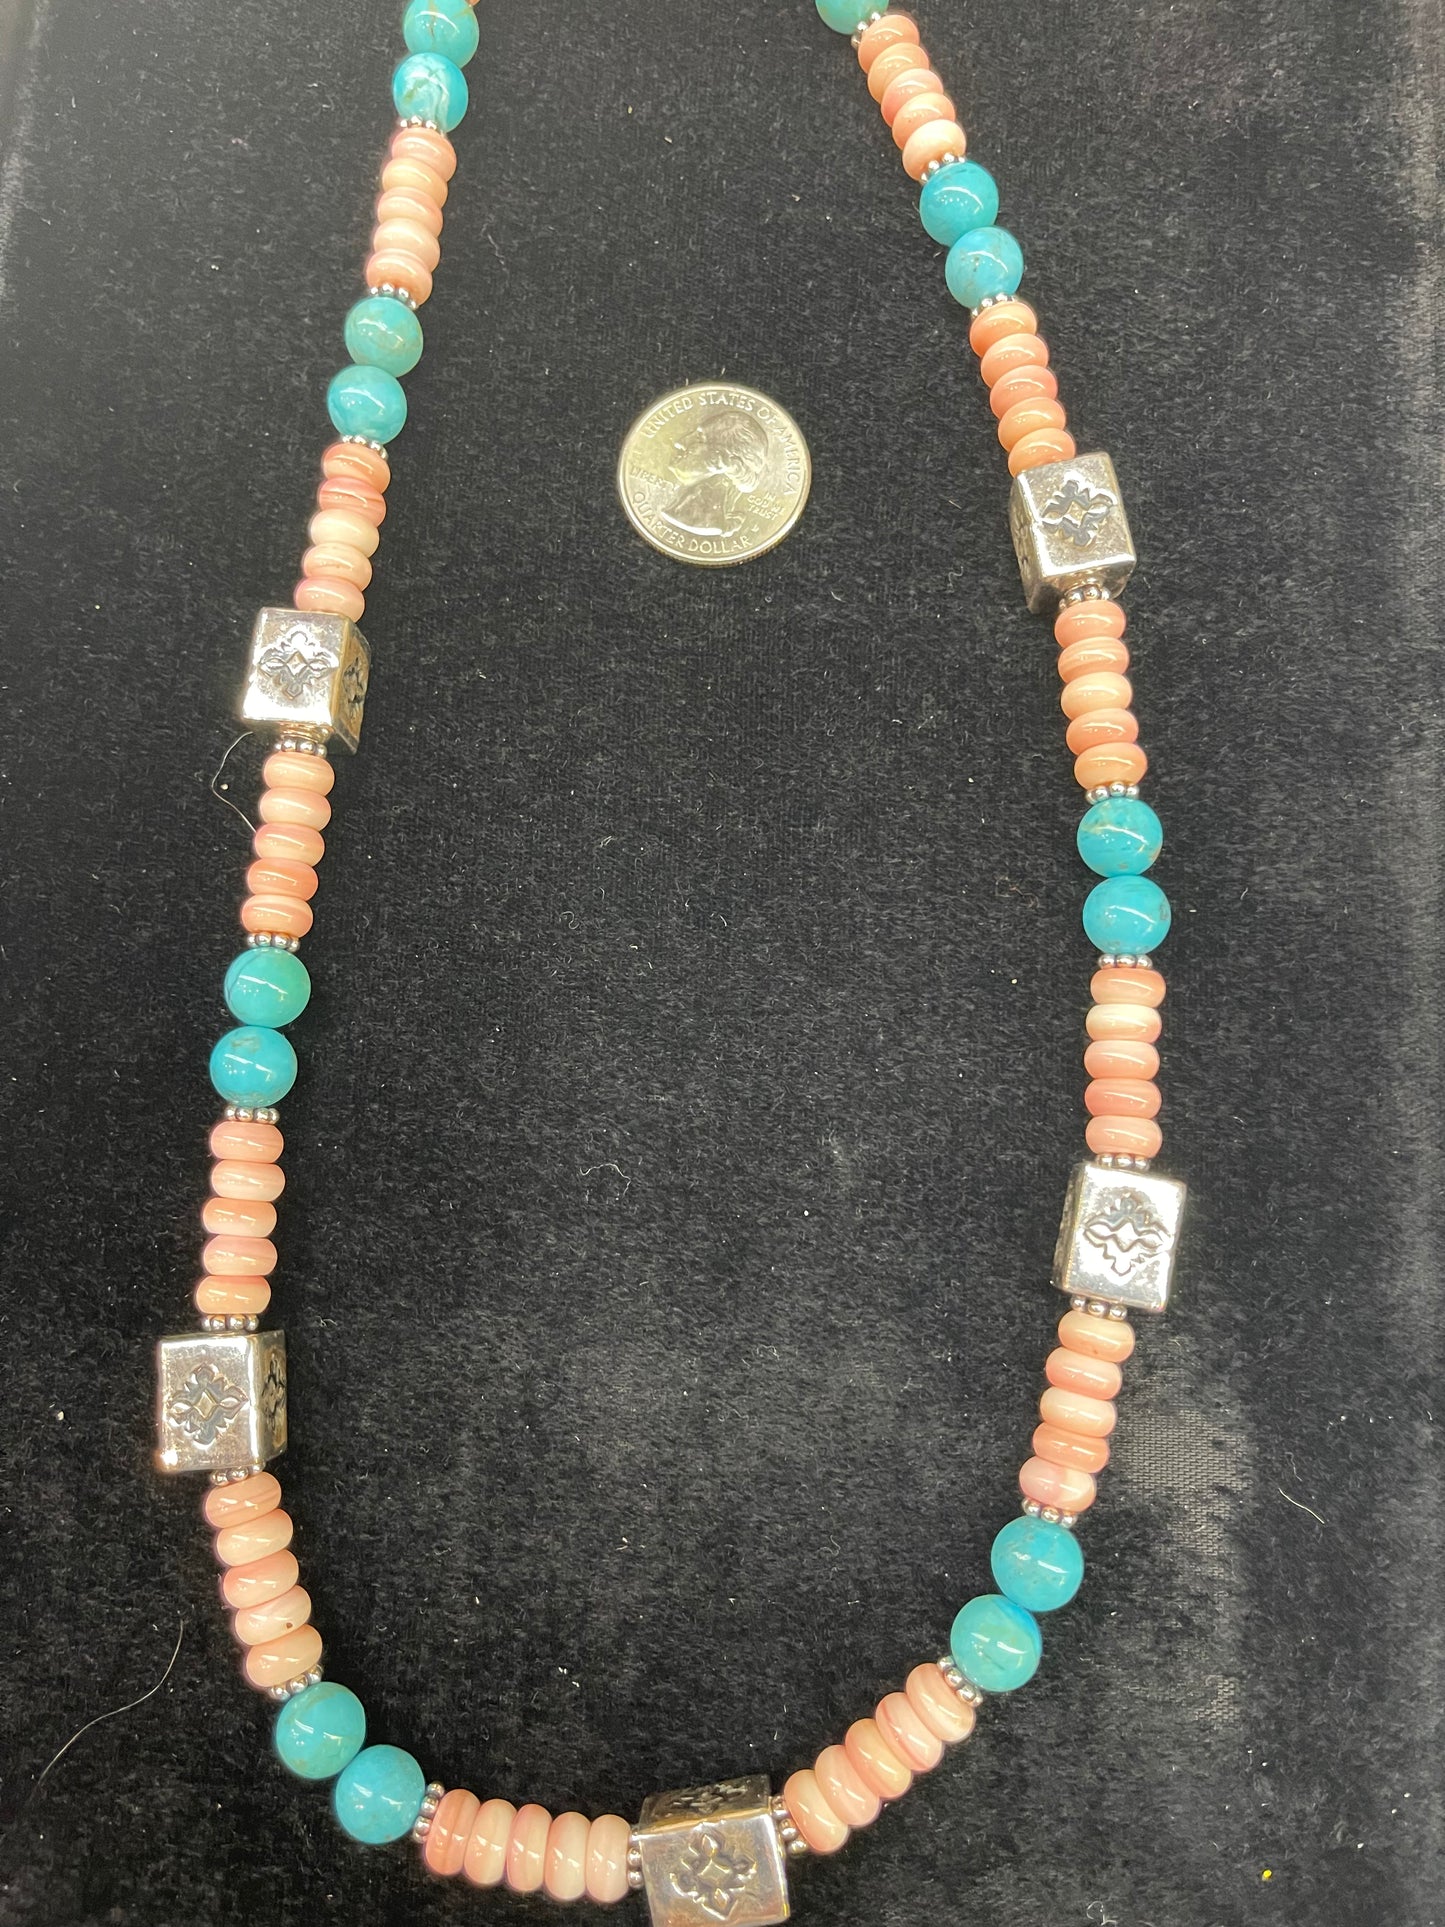 10mm Turquoise Beads and 8mm Conch Shell Beaded Necklace